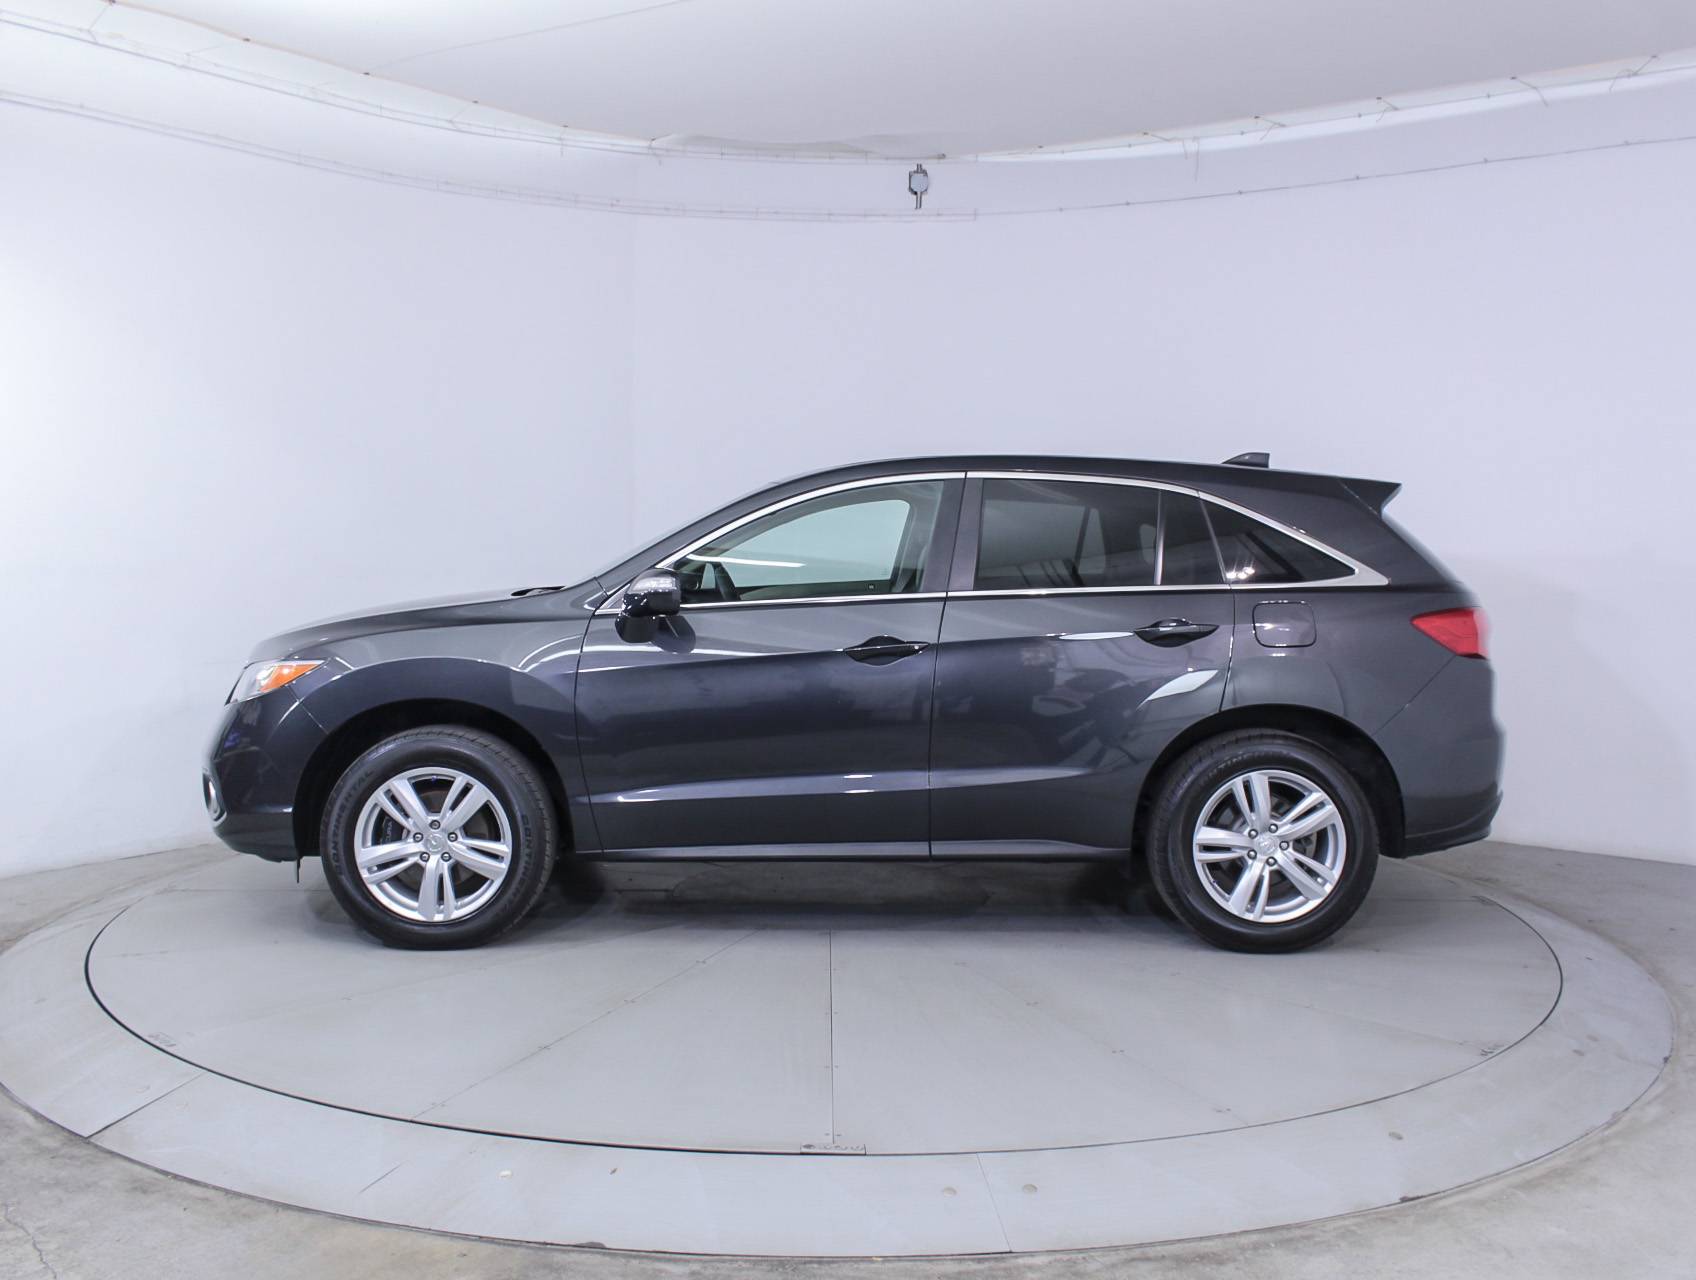 Florida Fine Cars - Used ACURA RDX 2014 MIAMI TECHNOLOGY PACKAGE